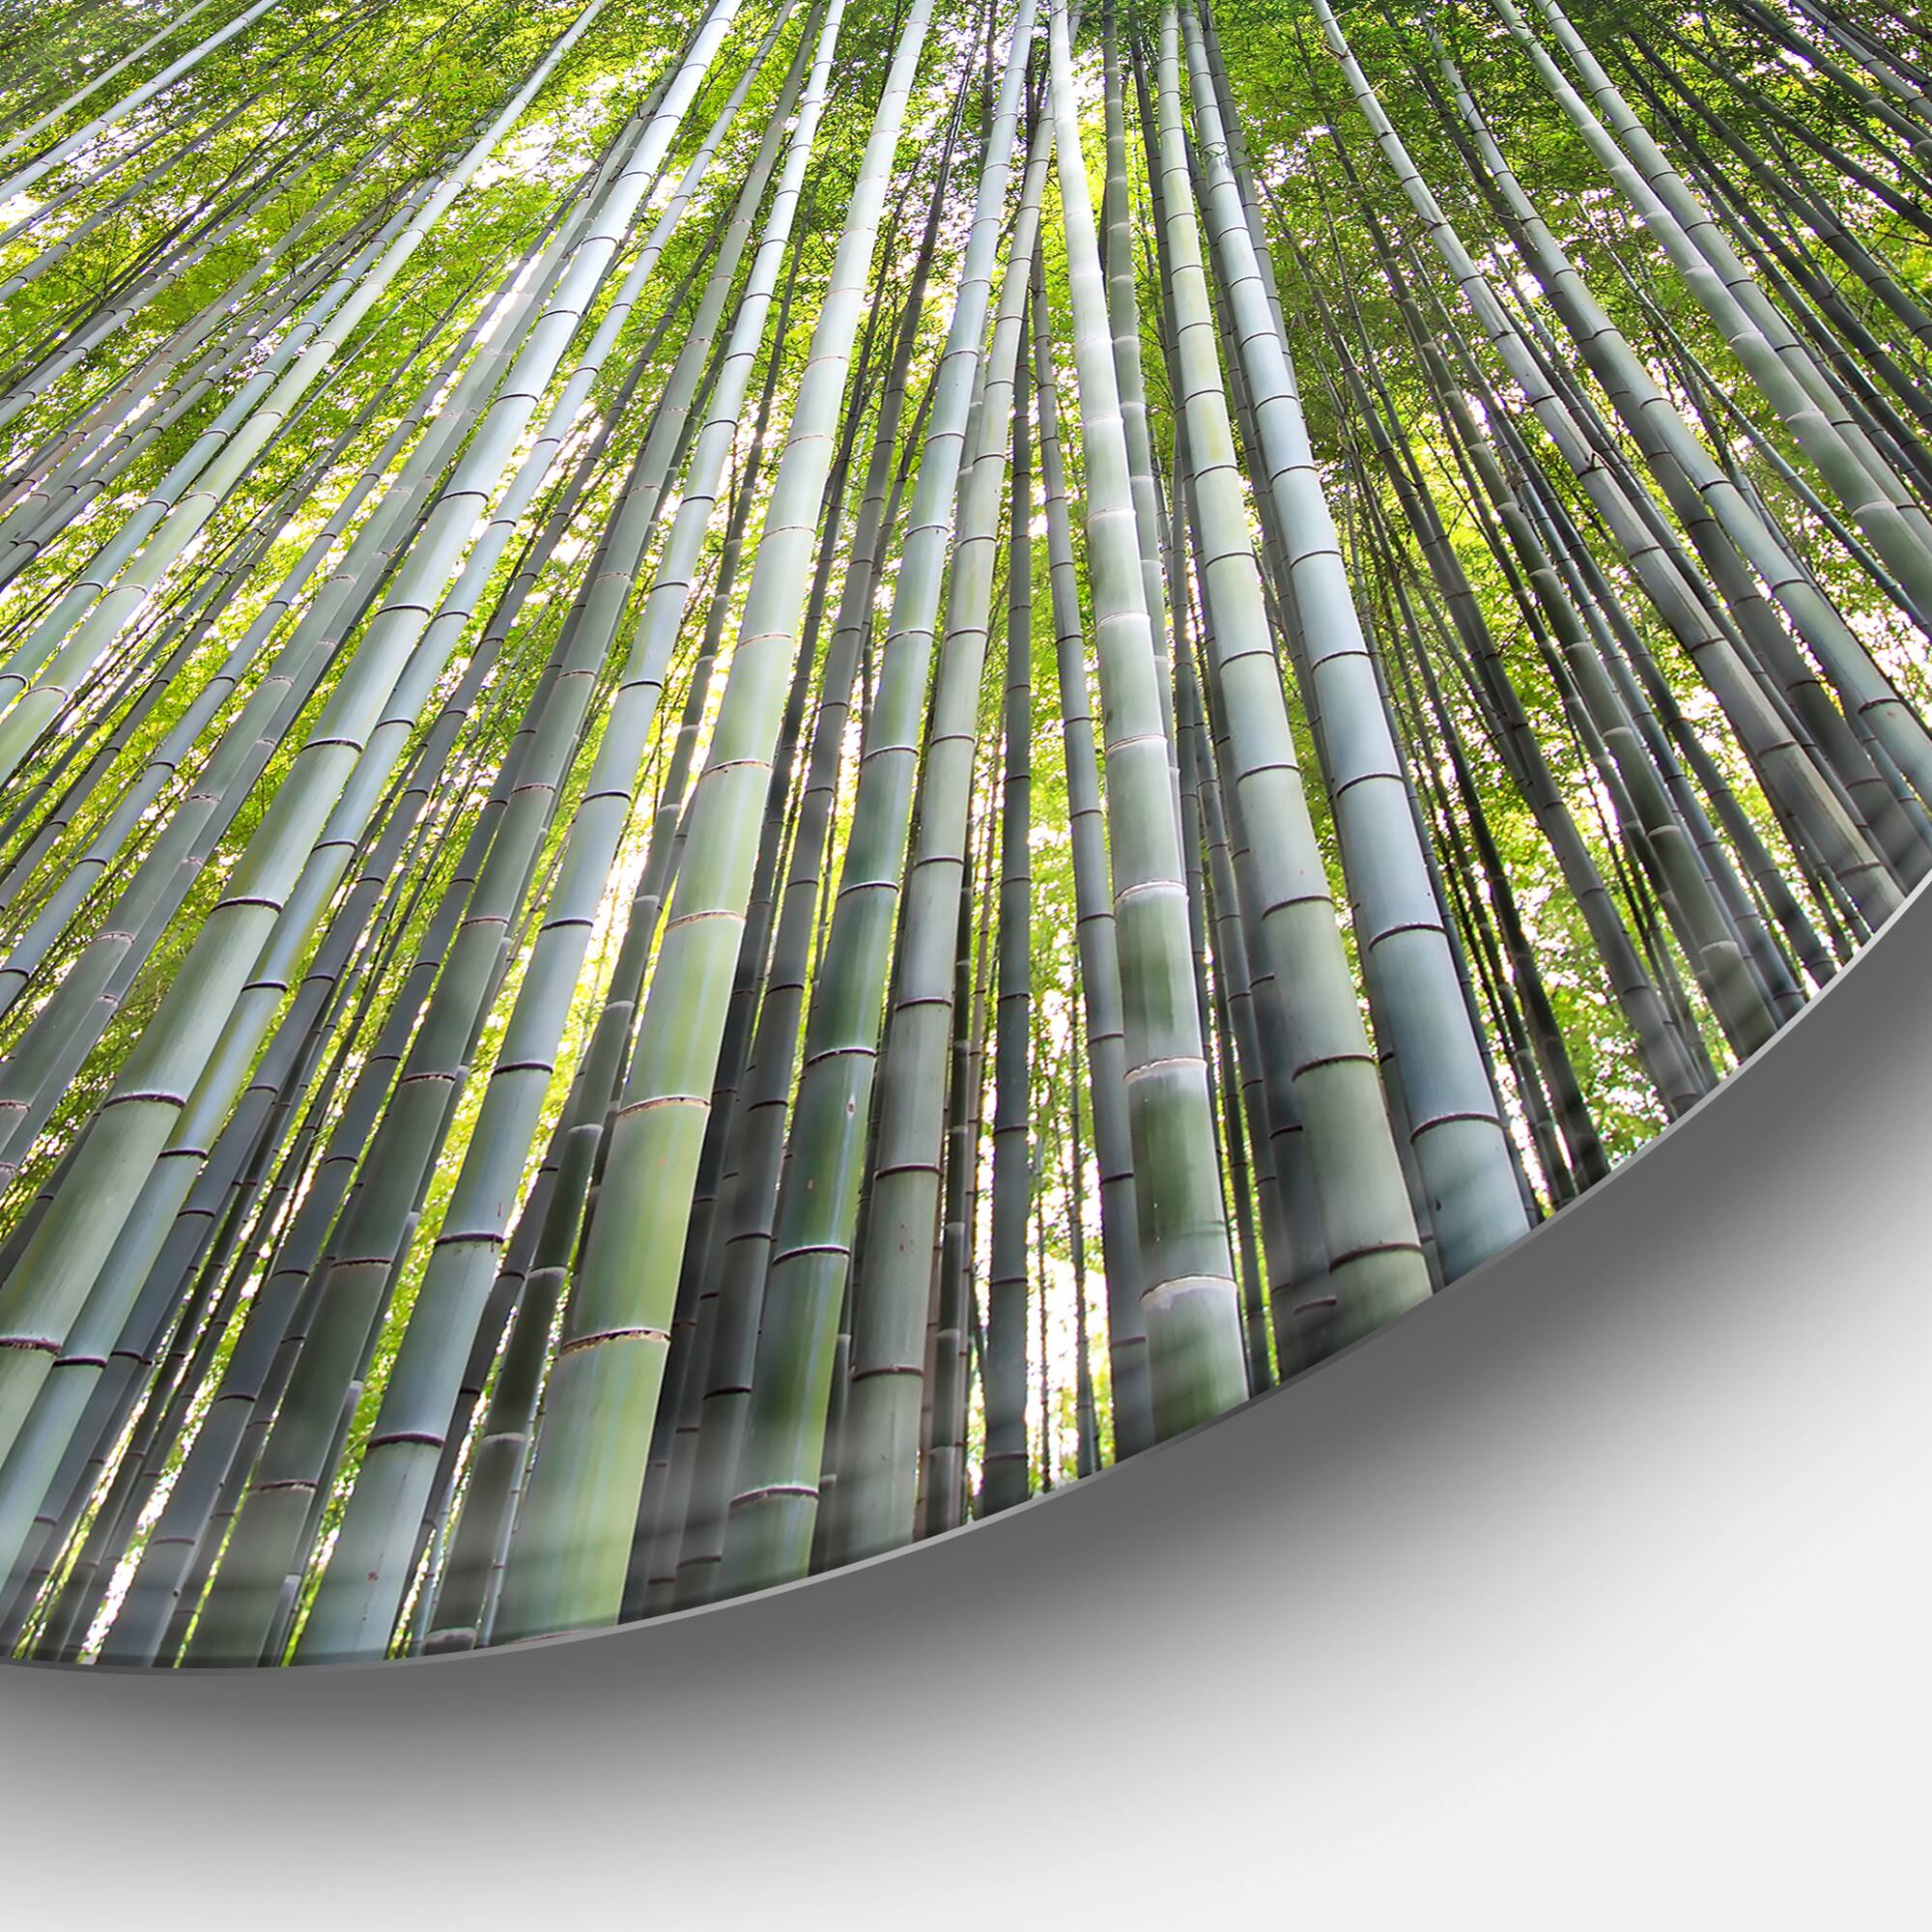 Designart - Bamboo forest of Kyoto Japan.&#x27; Forest Metal Circle Wall Art Print